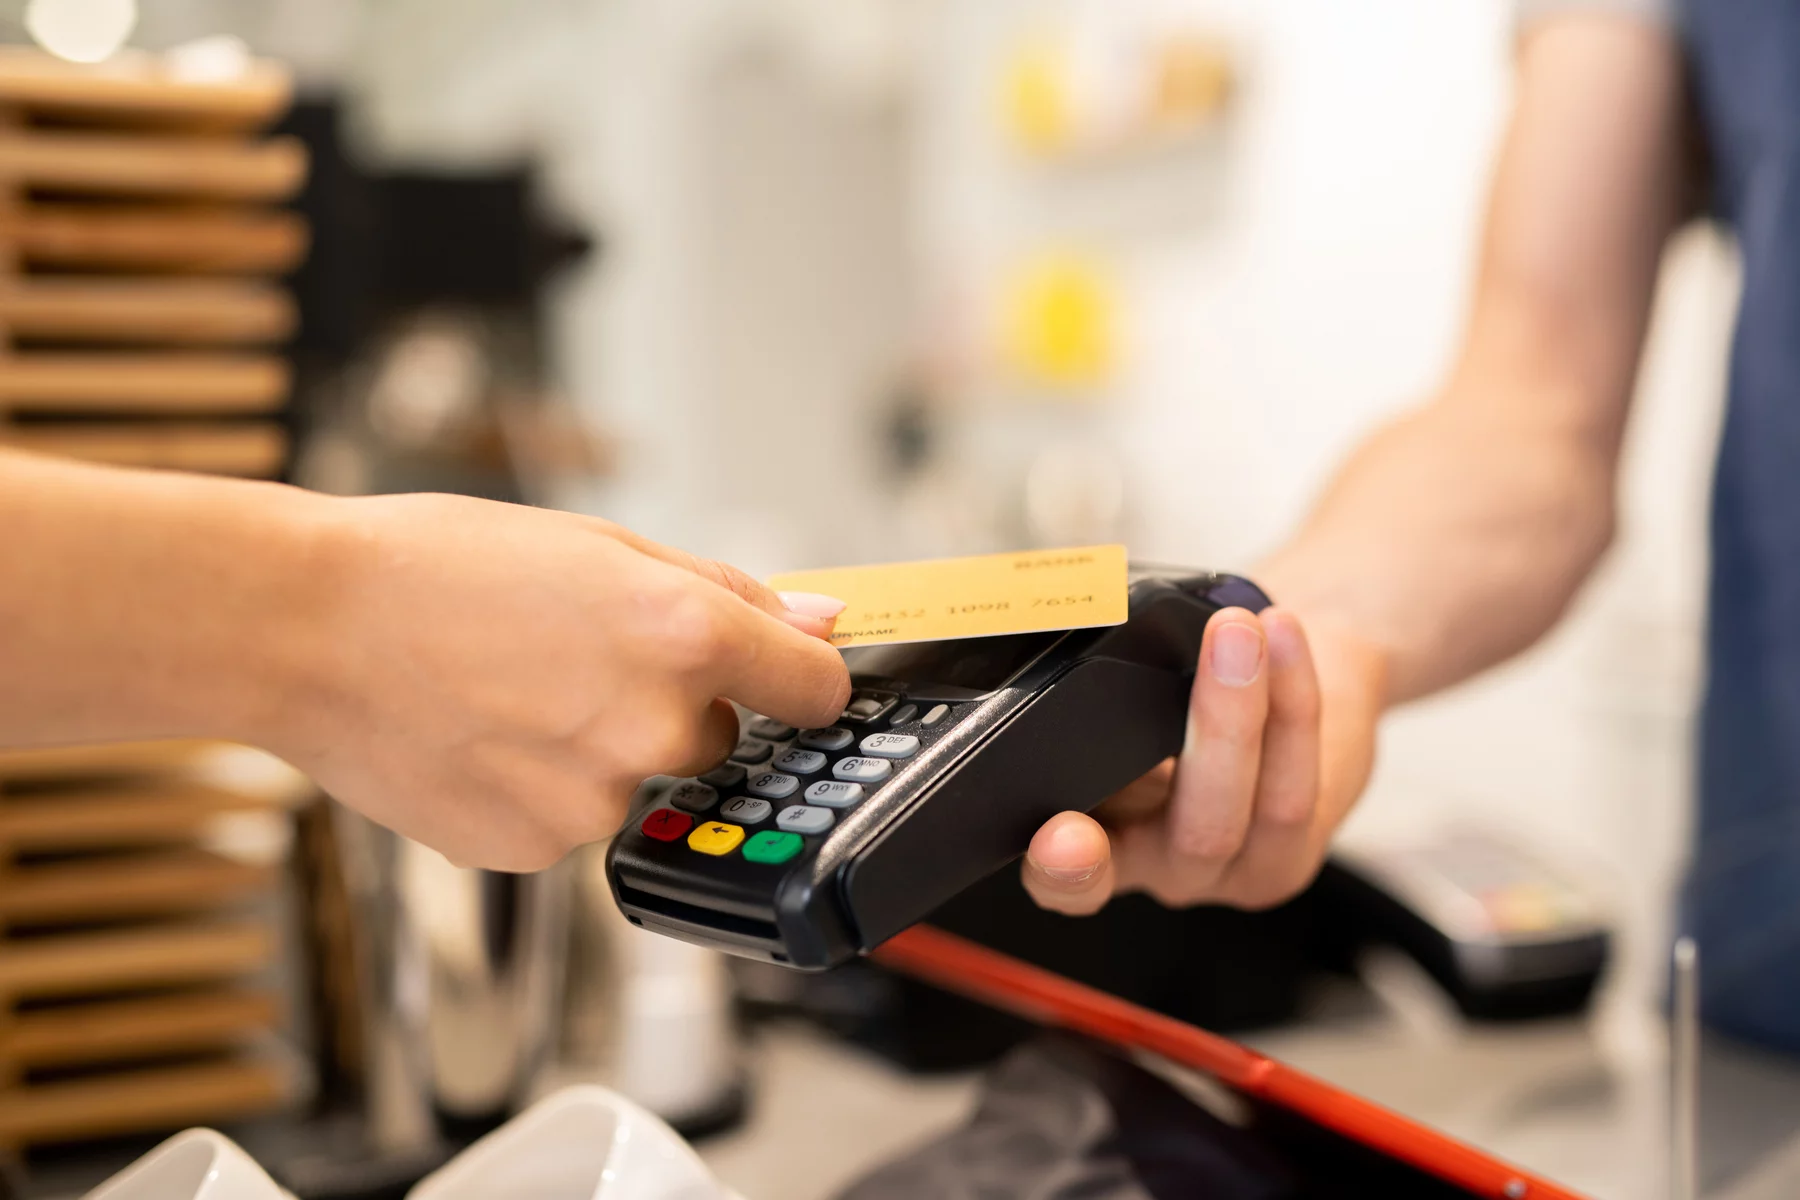 Paying the bill with a contactless card